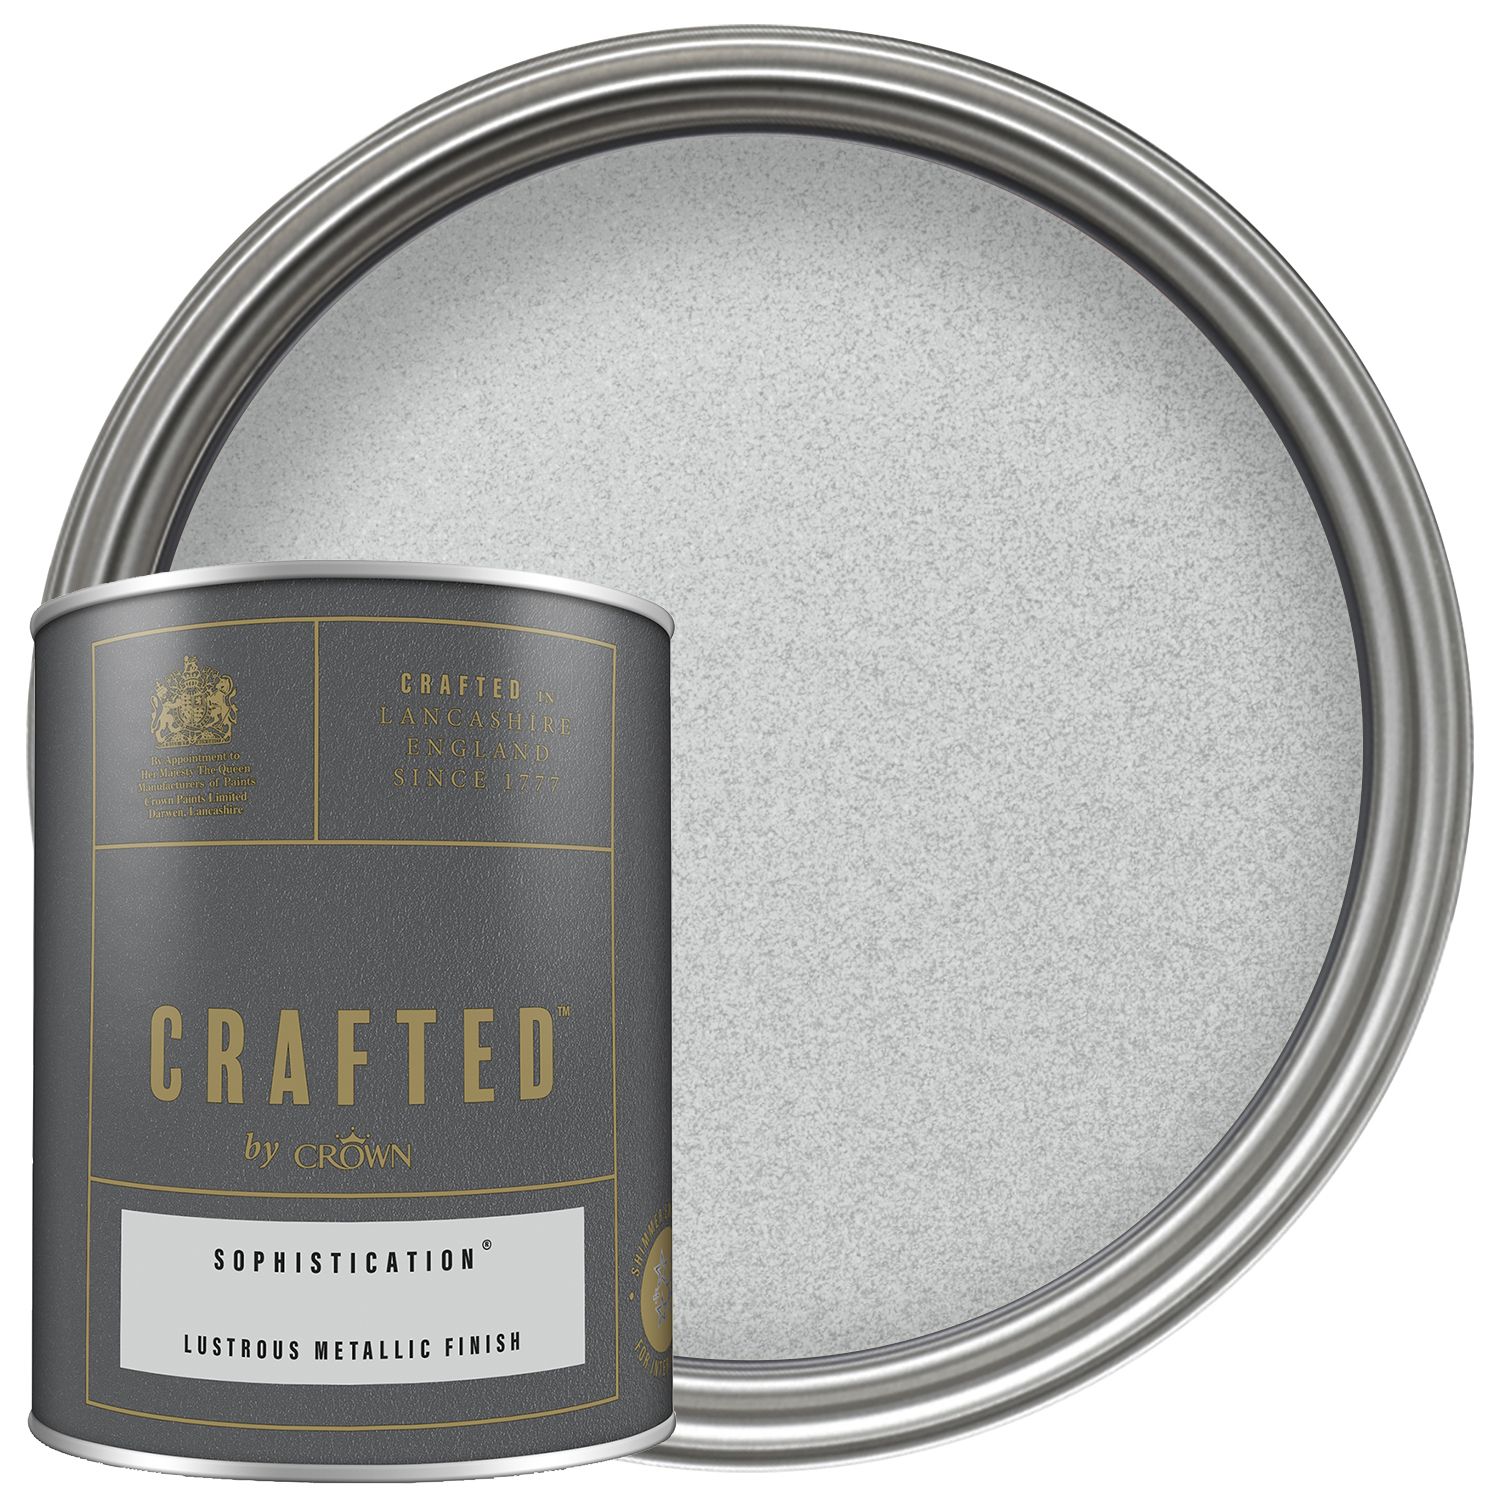 Image of CRAFTED™ by Crown Emulsion Interior Paint - Metallic Sophistication - 1.25L